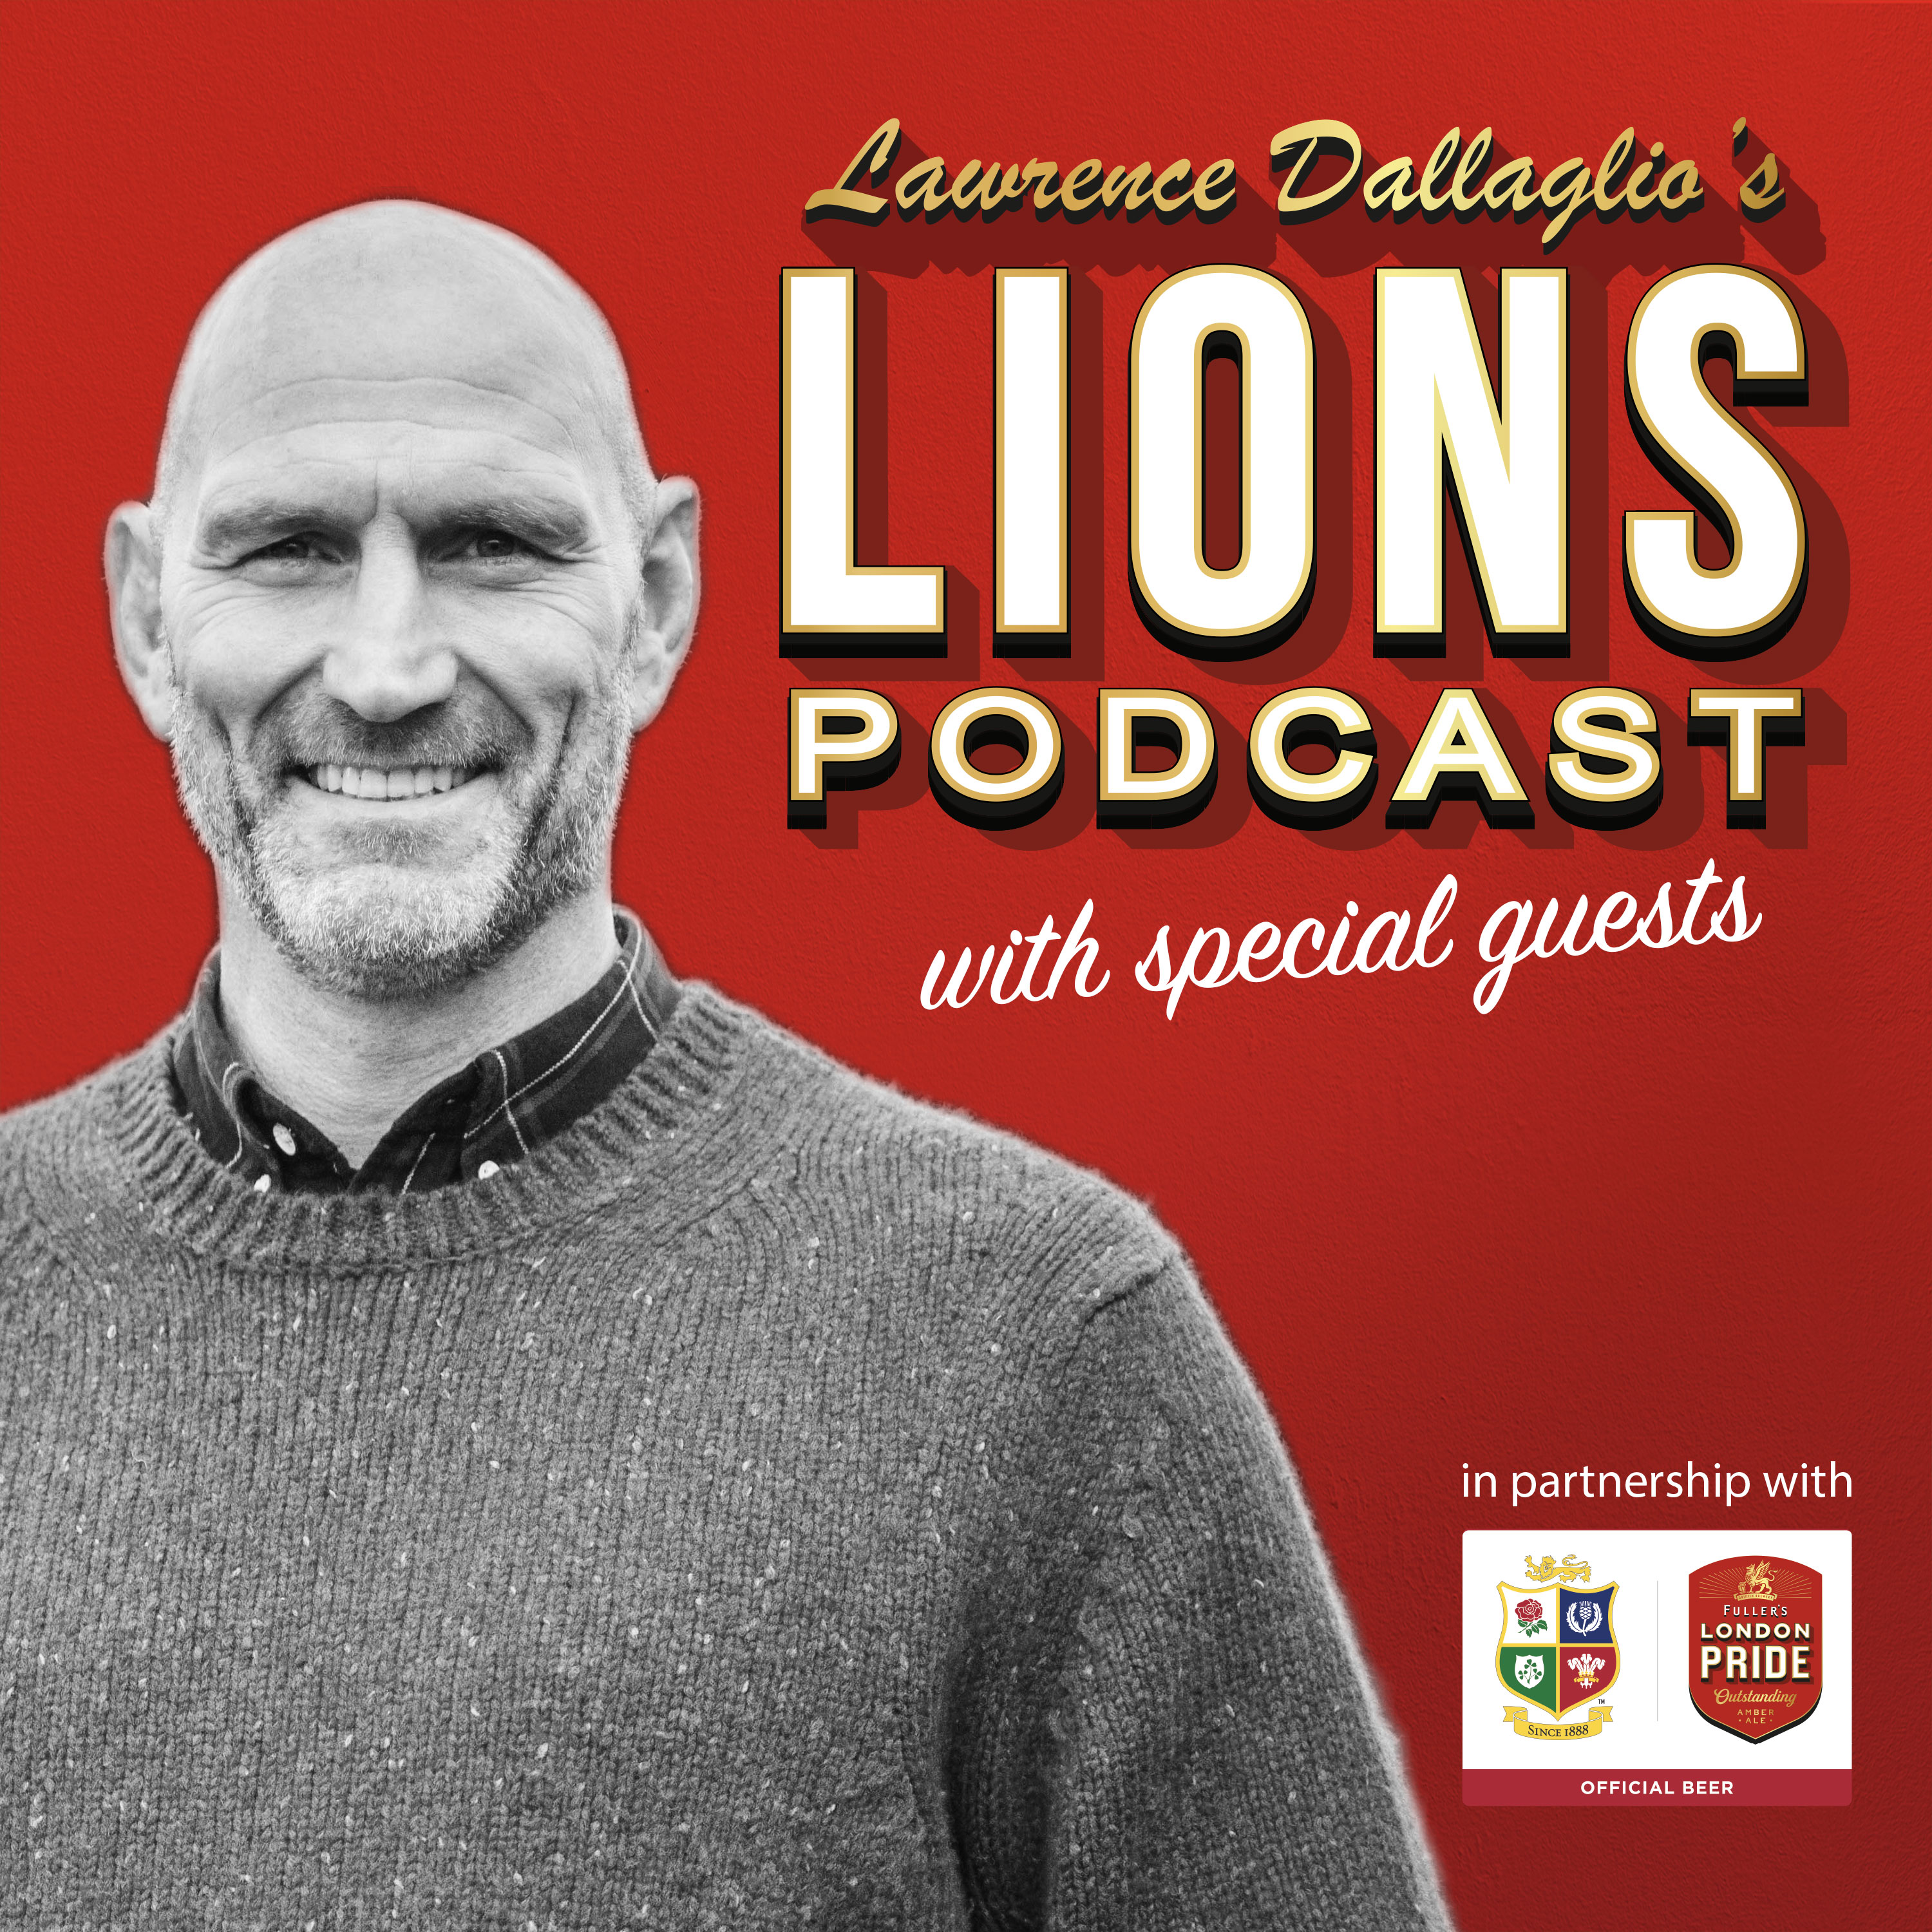 Lawrence Dallaglio's Lions Podcast coming July 2nd